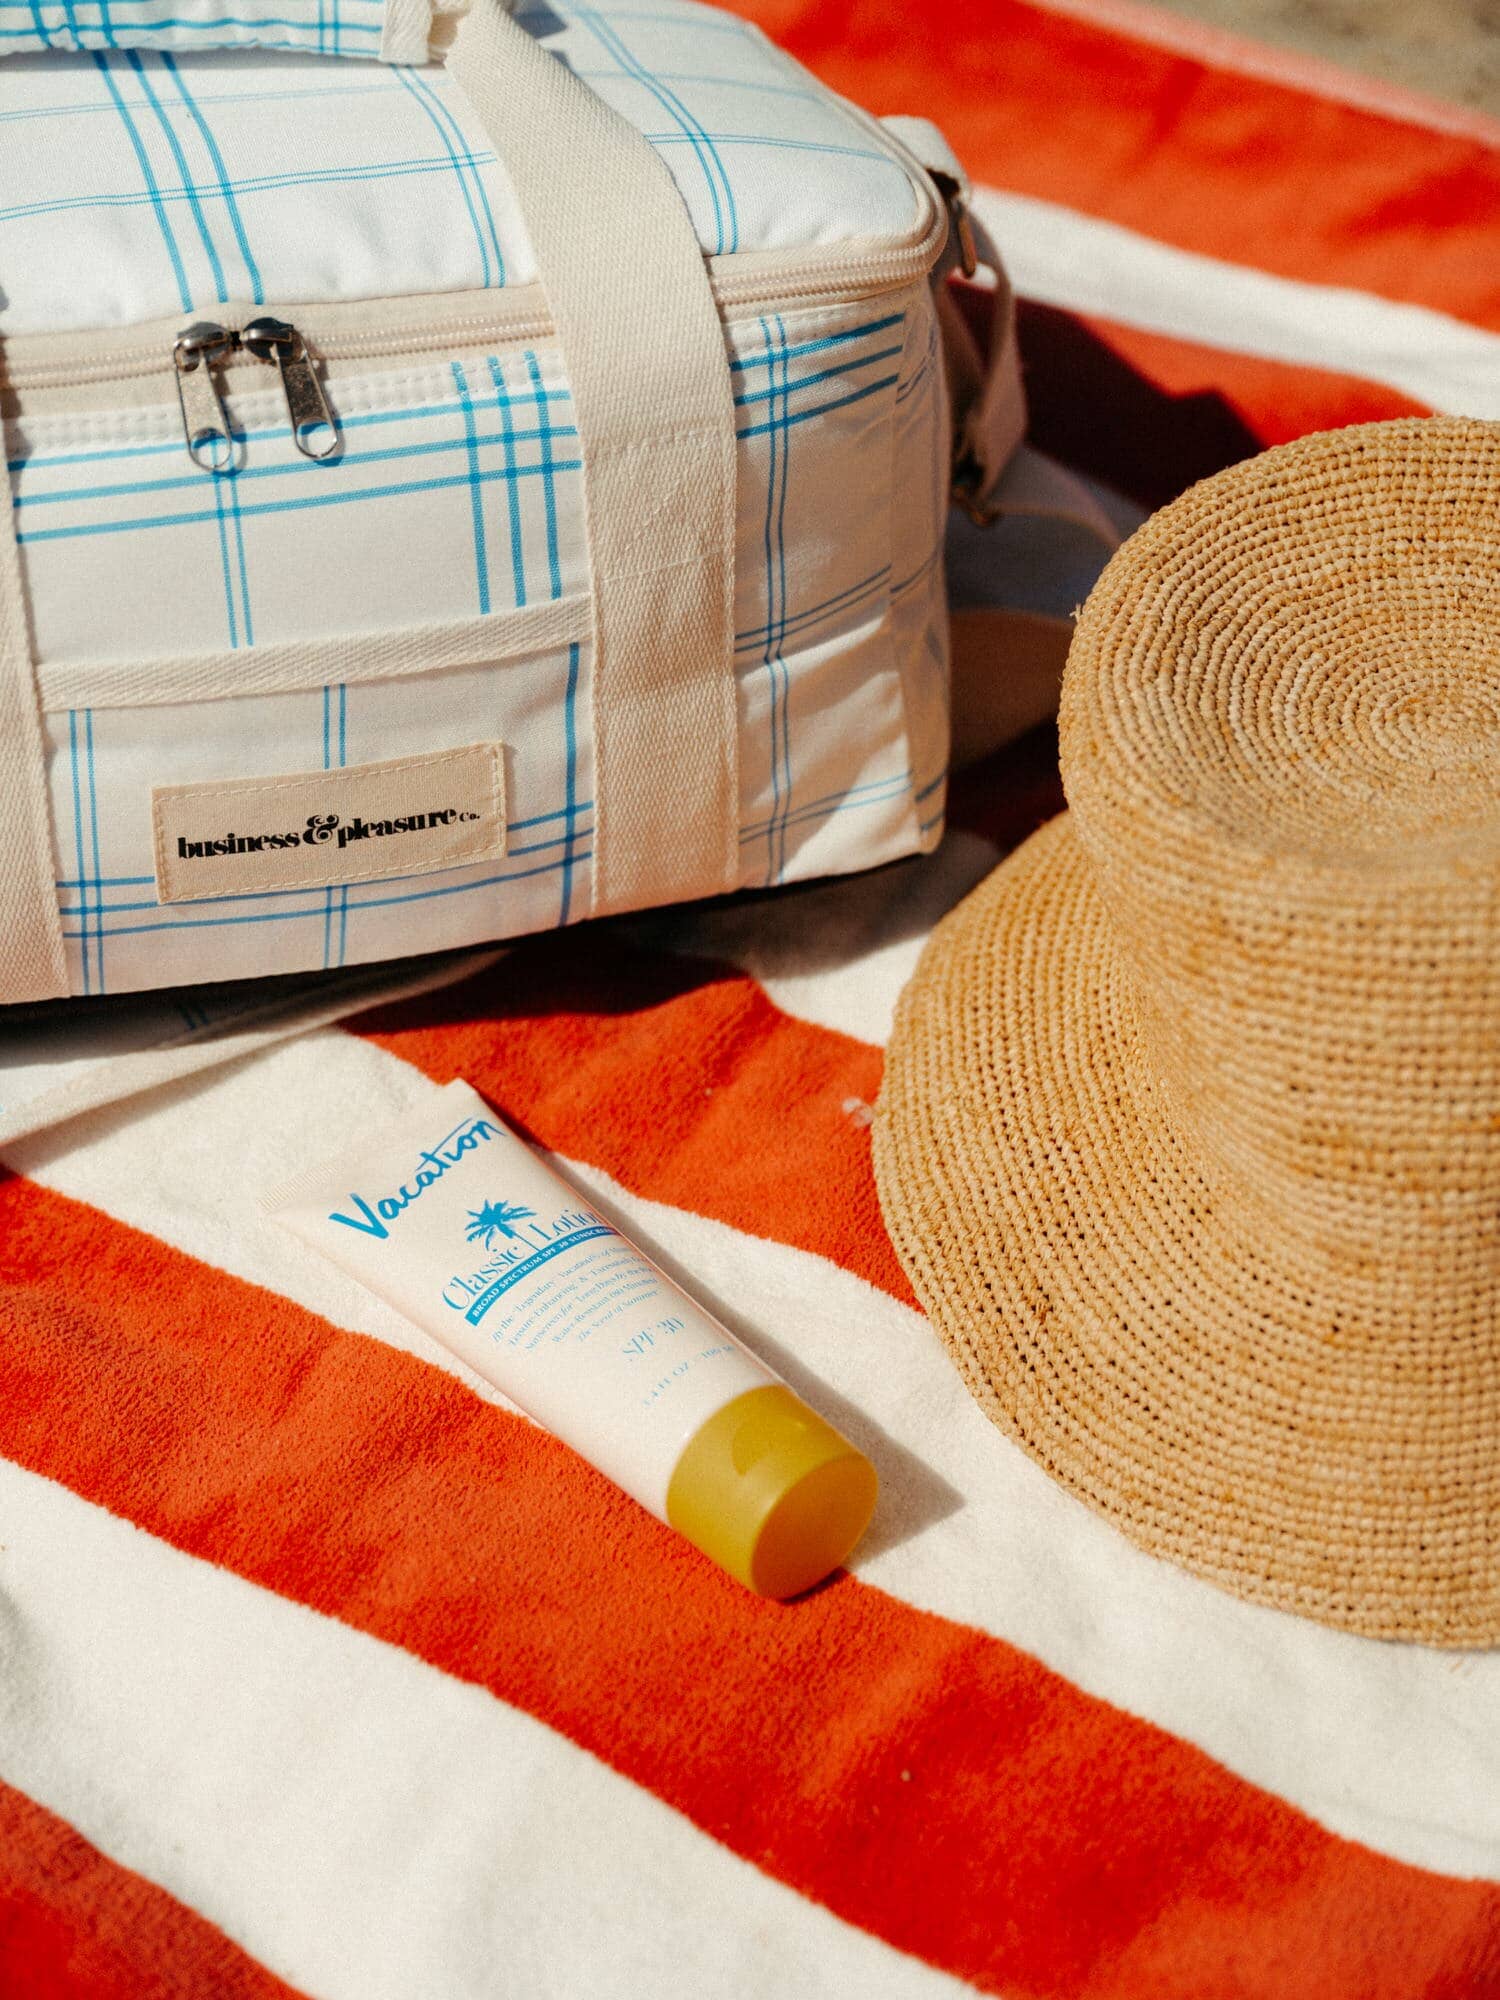 Blue plaid holiday cooler and le sirenuse beach towel with beach hat and sunscreen